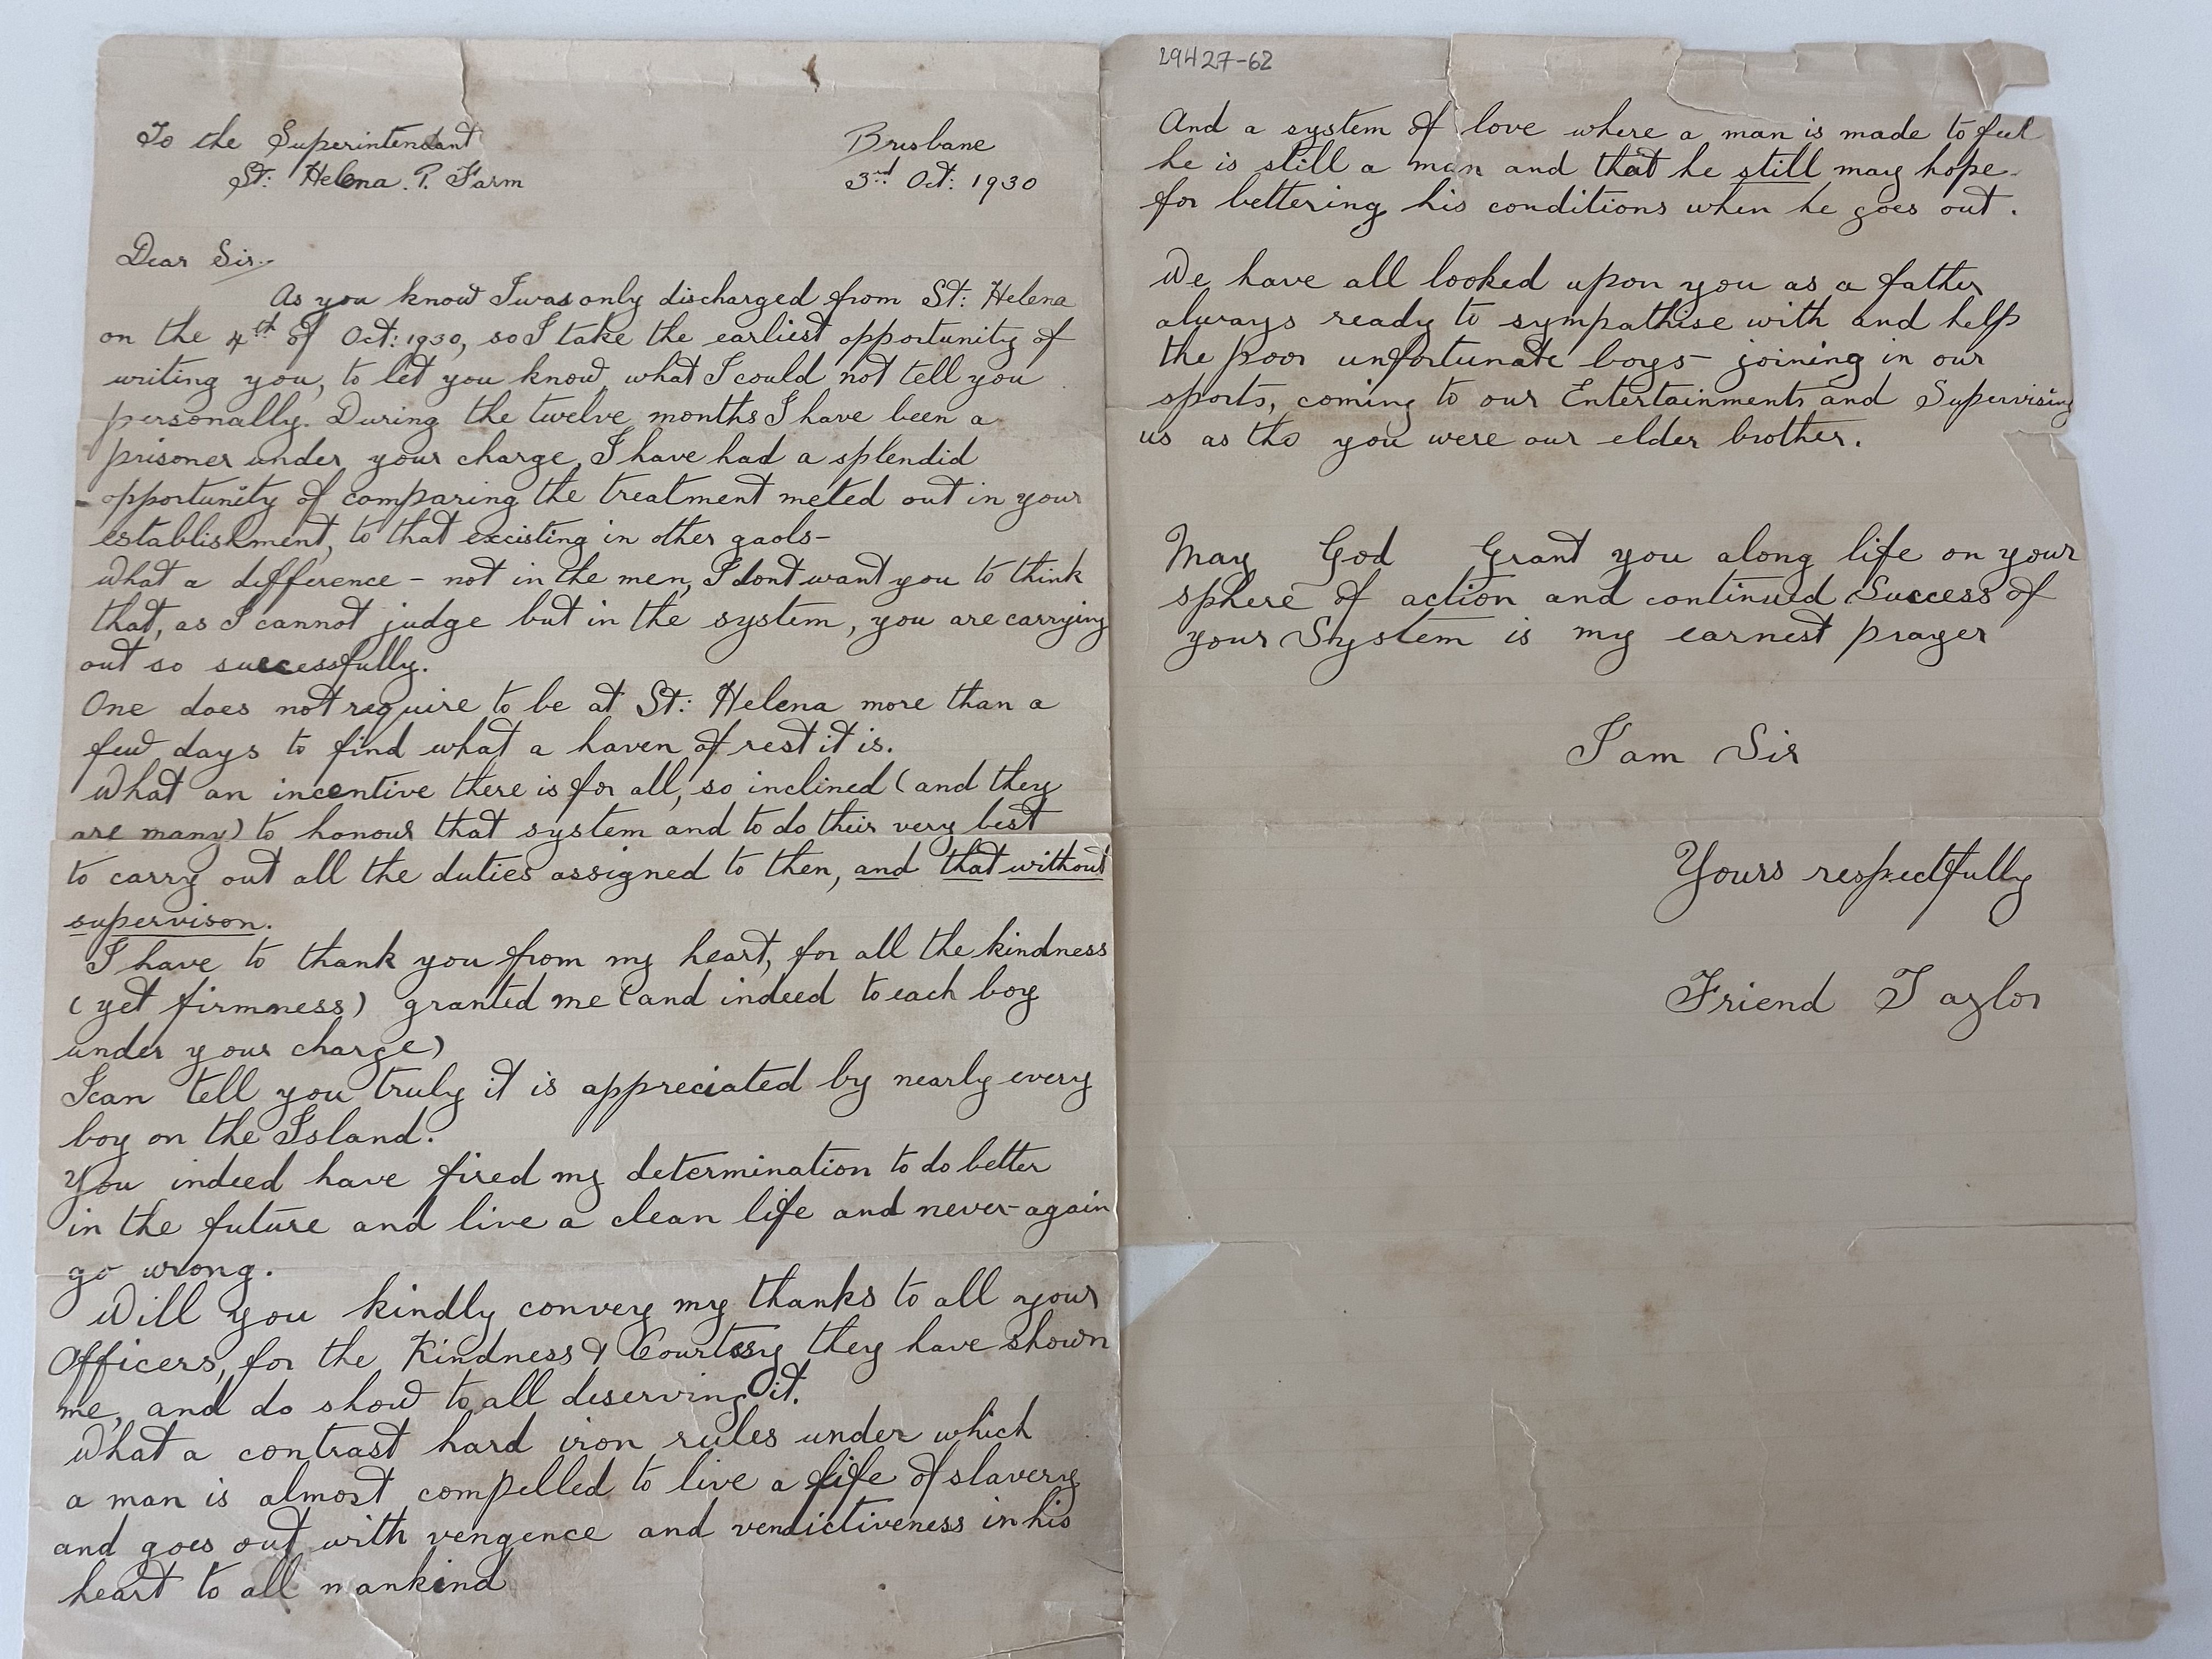 Letters that sent to acting superintendent Patrick Roche by prisoners to express the gratitude for the honour system and the time they served as St Helena Island Prison Farm, October 1930.